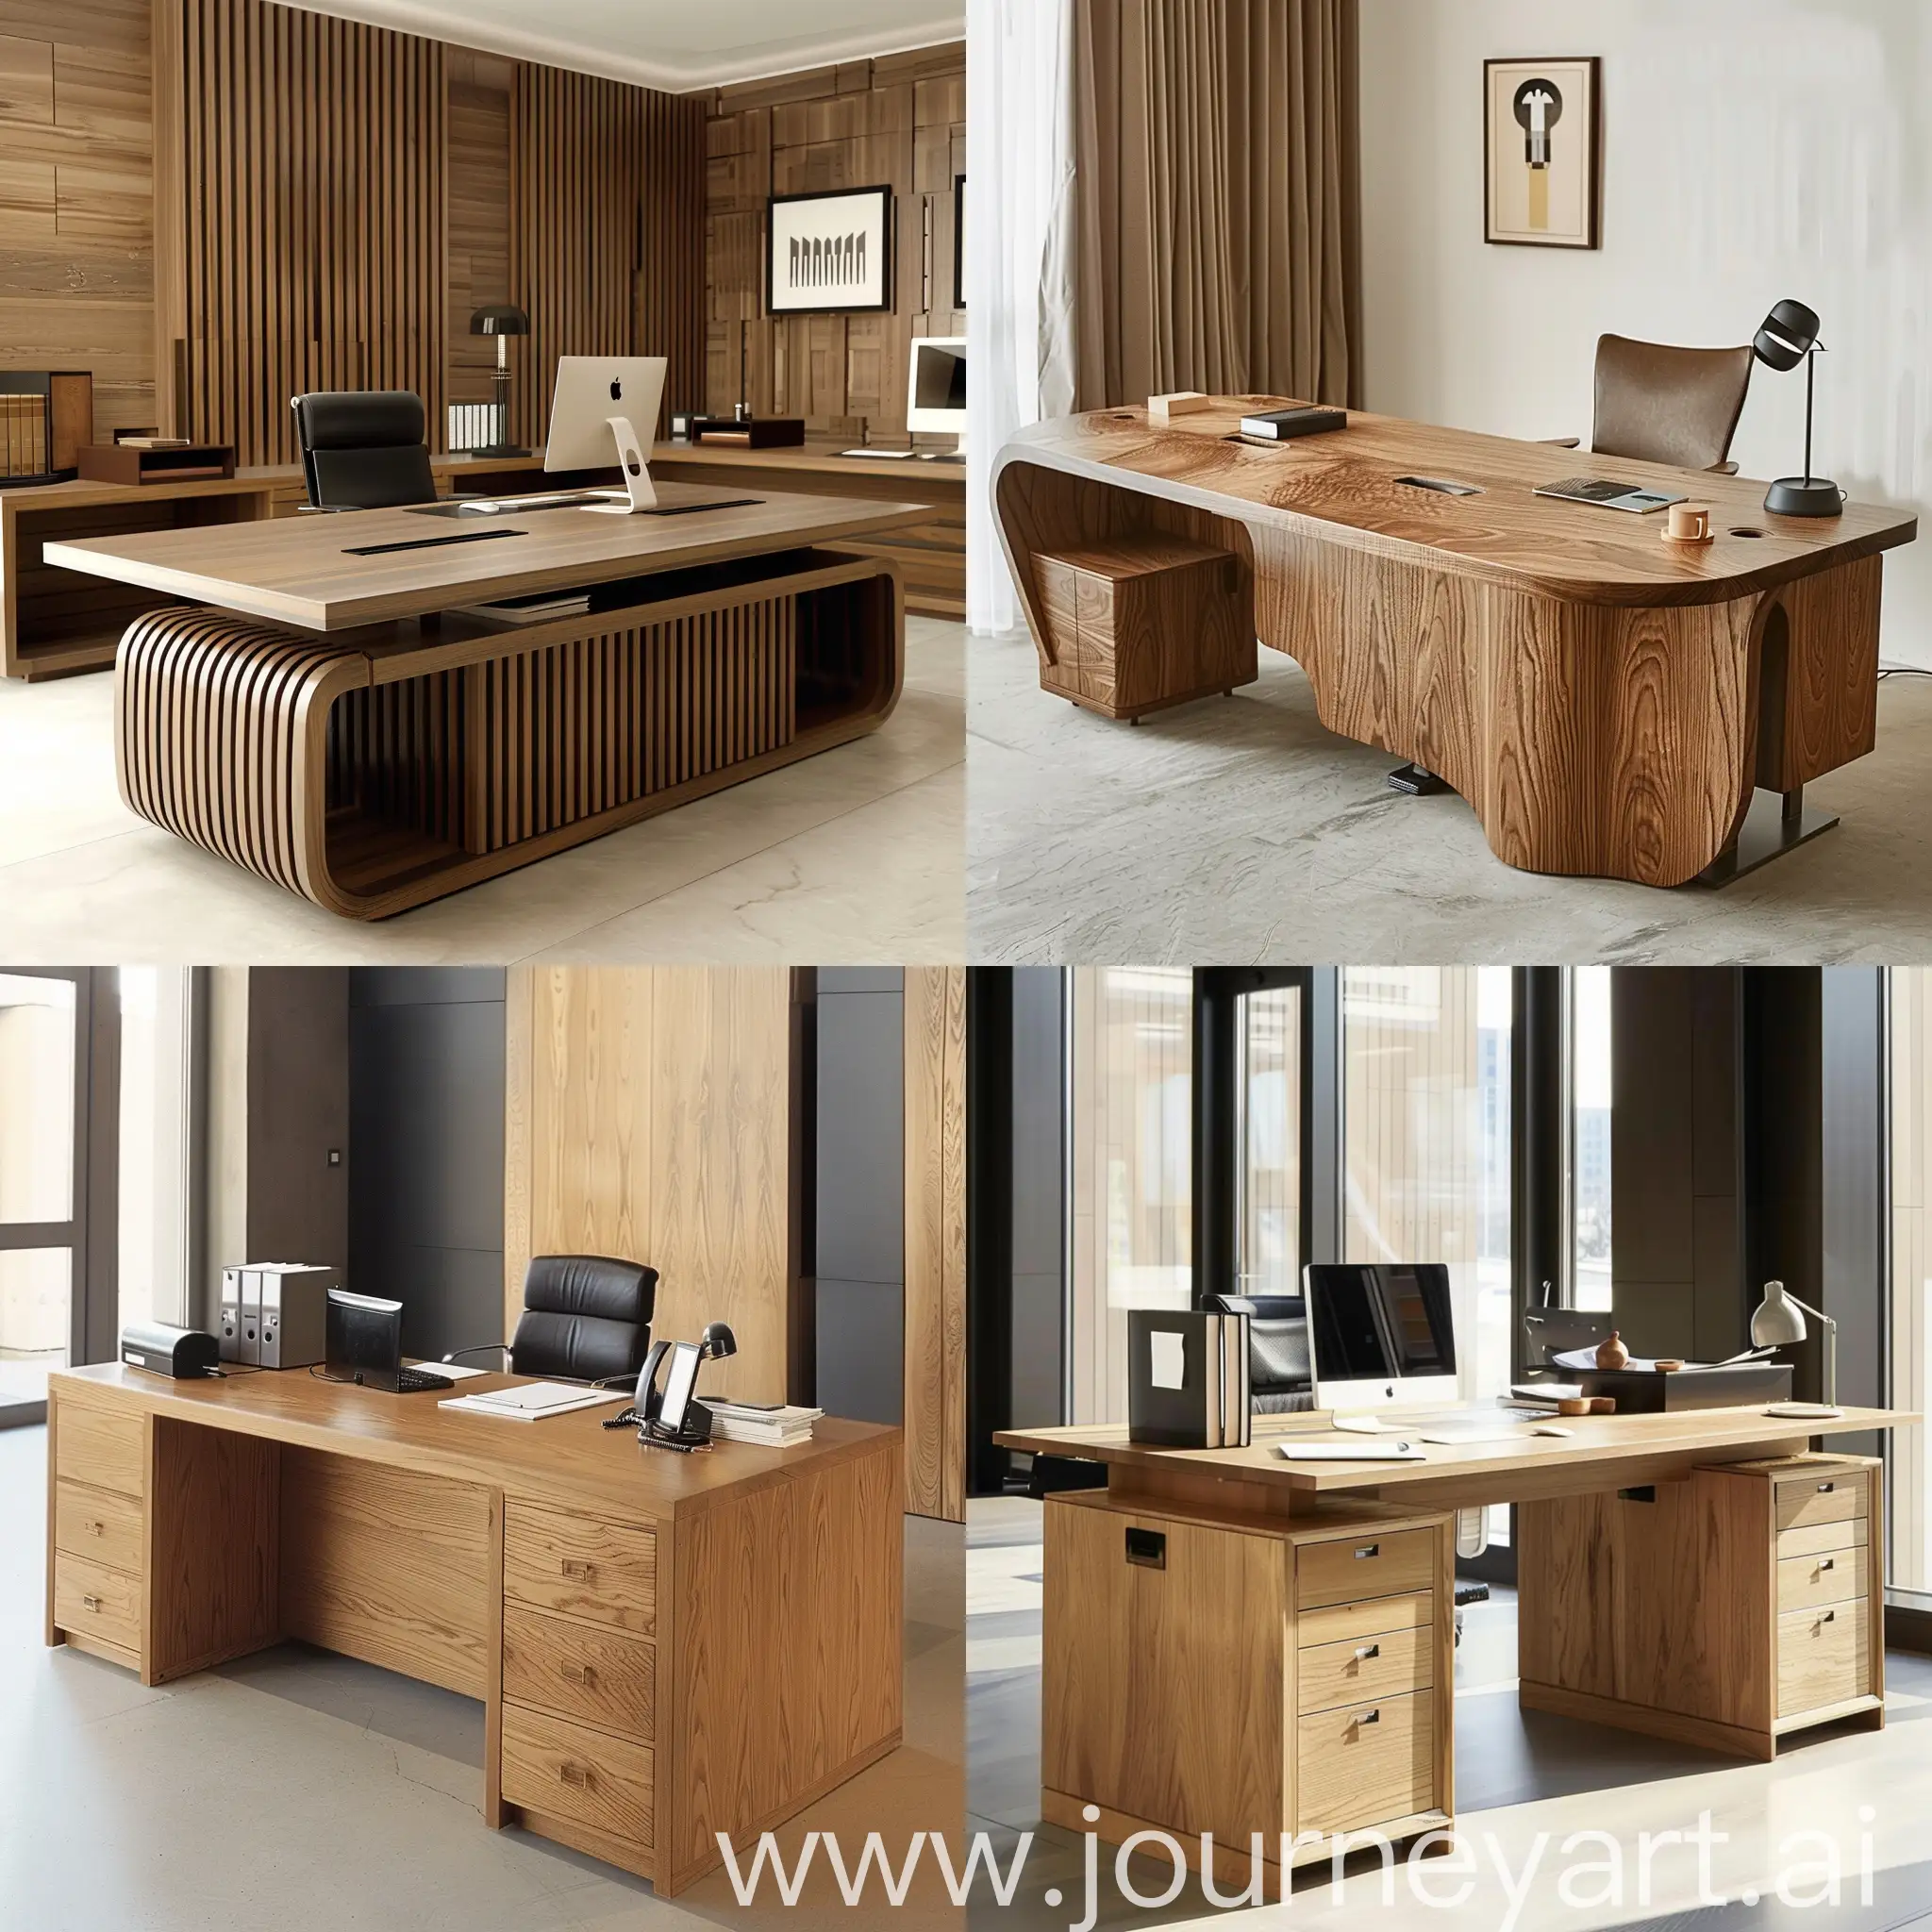 Minimalist-Administrative-Office-Desk-with-Natural-Materials